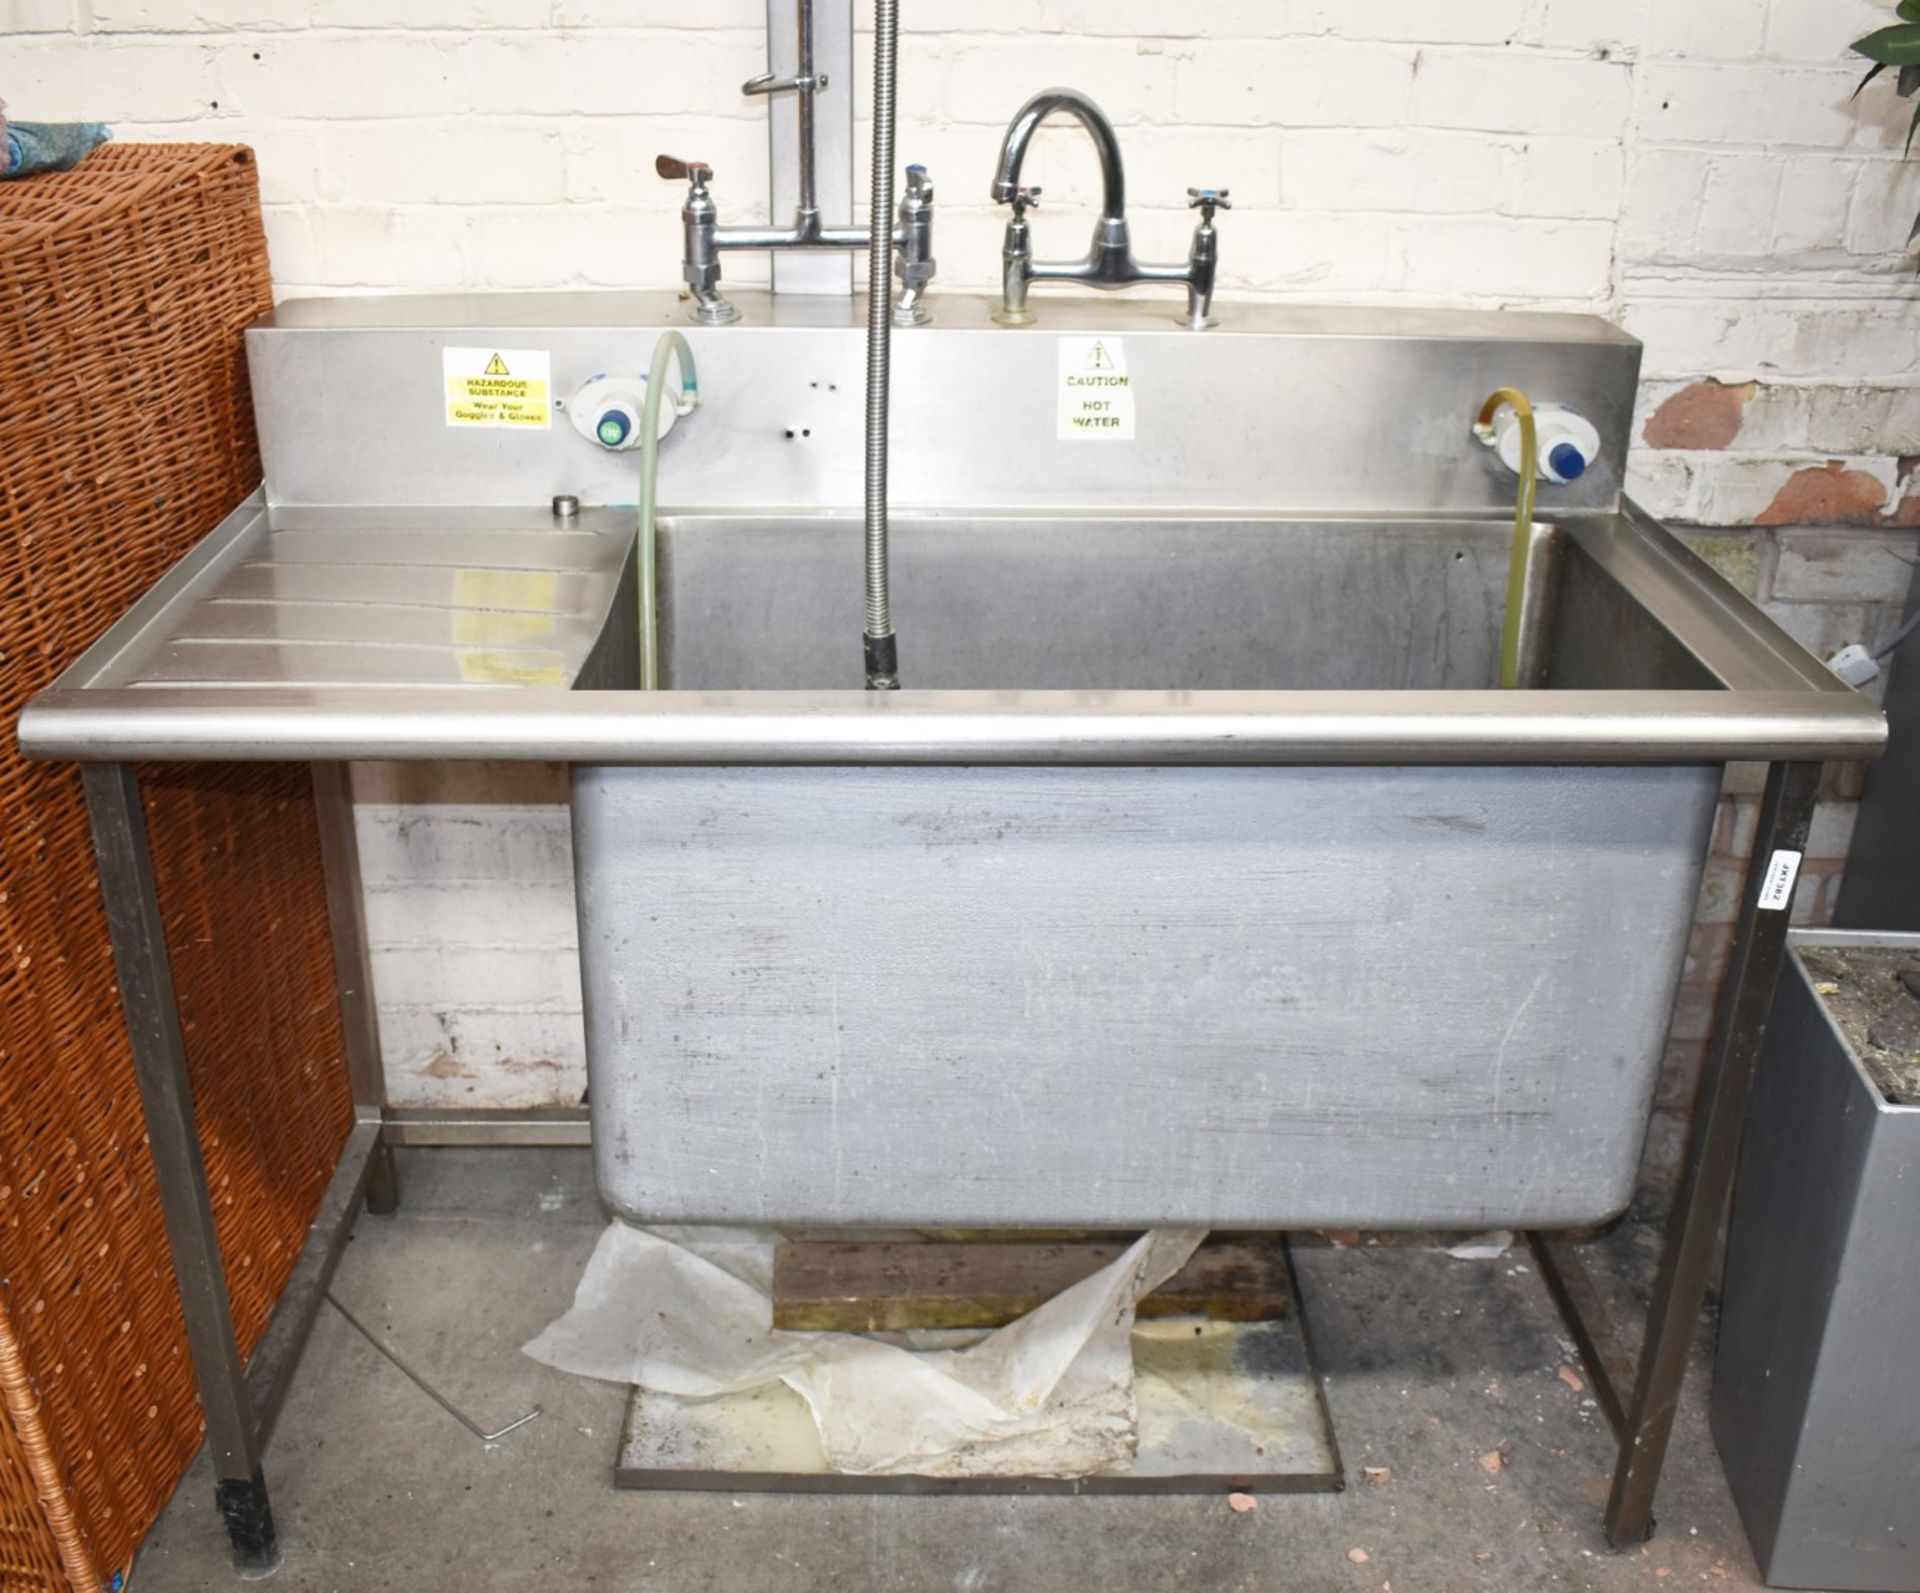 1 x Commercial Kitchen Wash Station With Single Large Deep Sink Bowls, Mixer Taps, Spray Wash Gun,